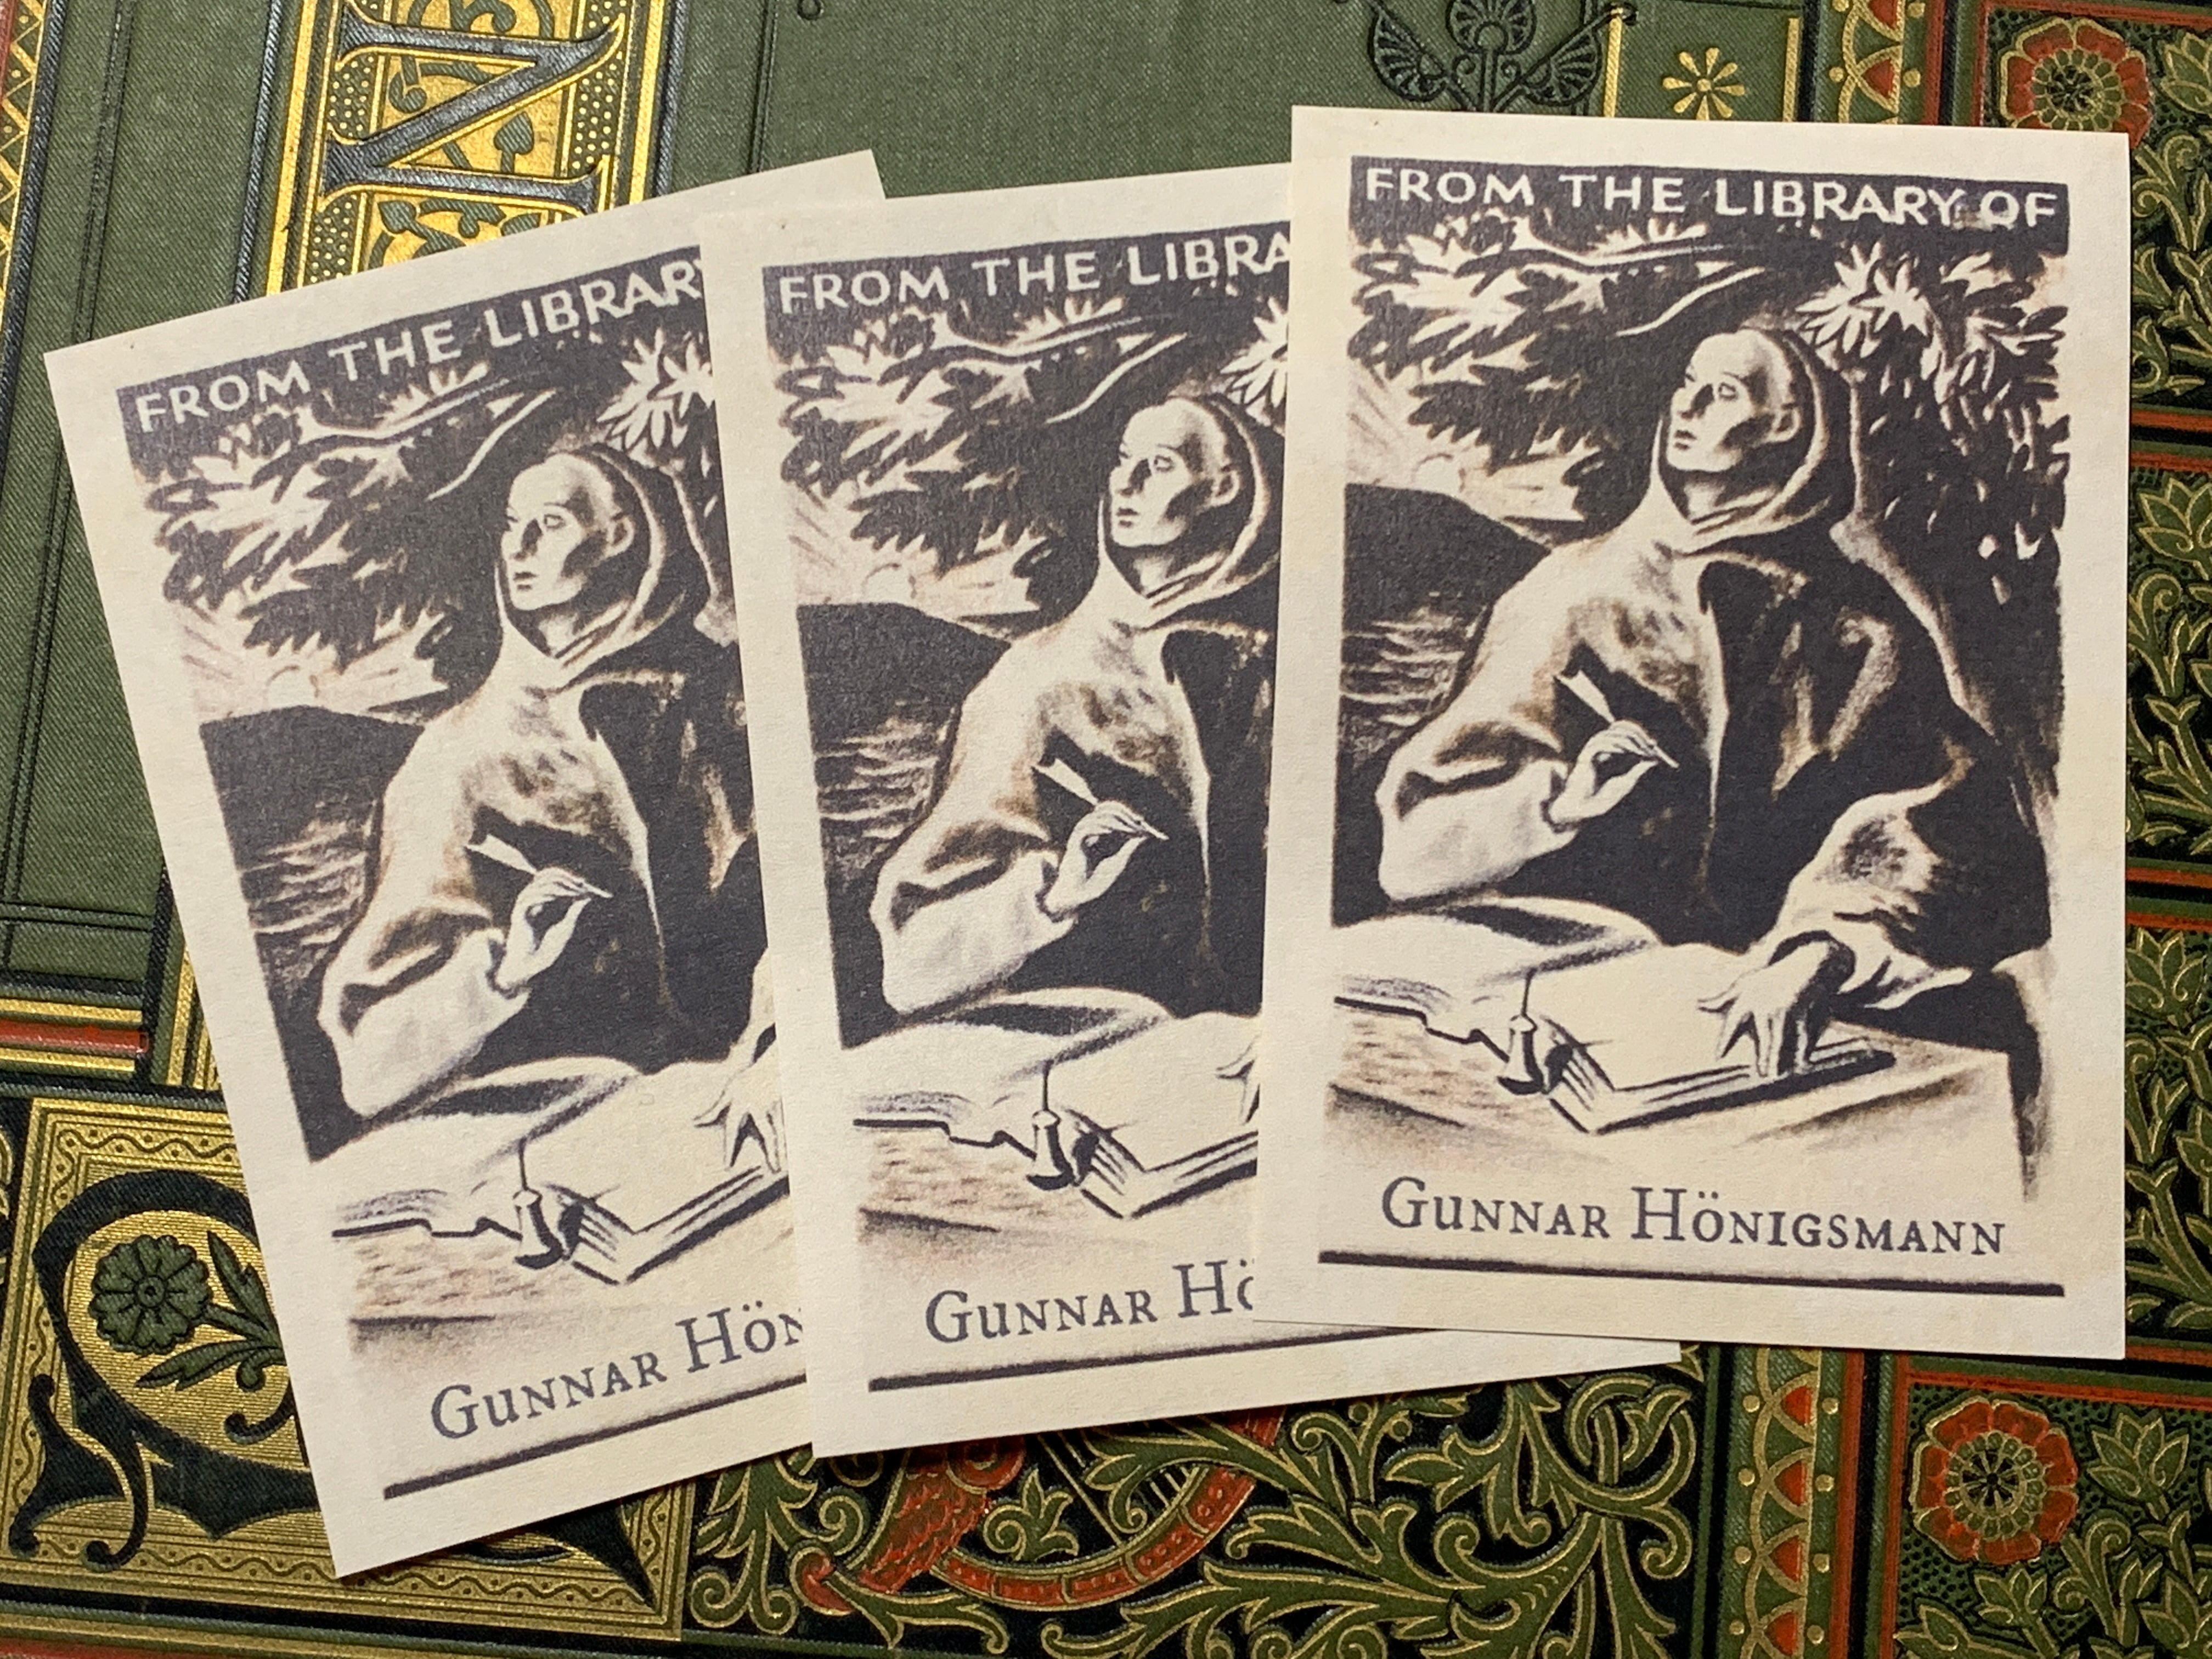 Monk Scribe, Personalized Ex-Libris Bookplates, Crafted on Traditional Gummed Paper, 2.75in x 4in, Set of 30